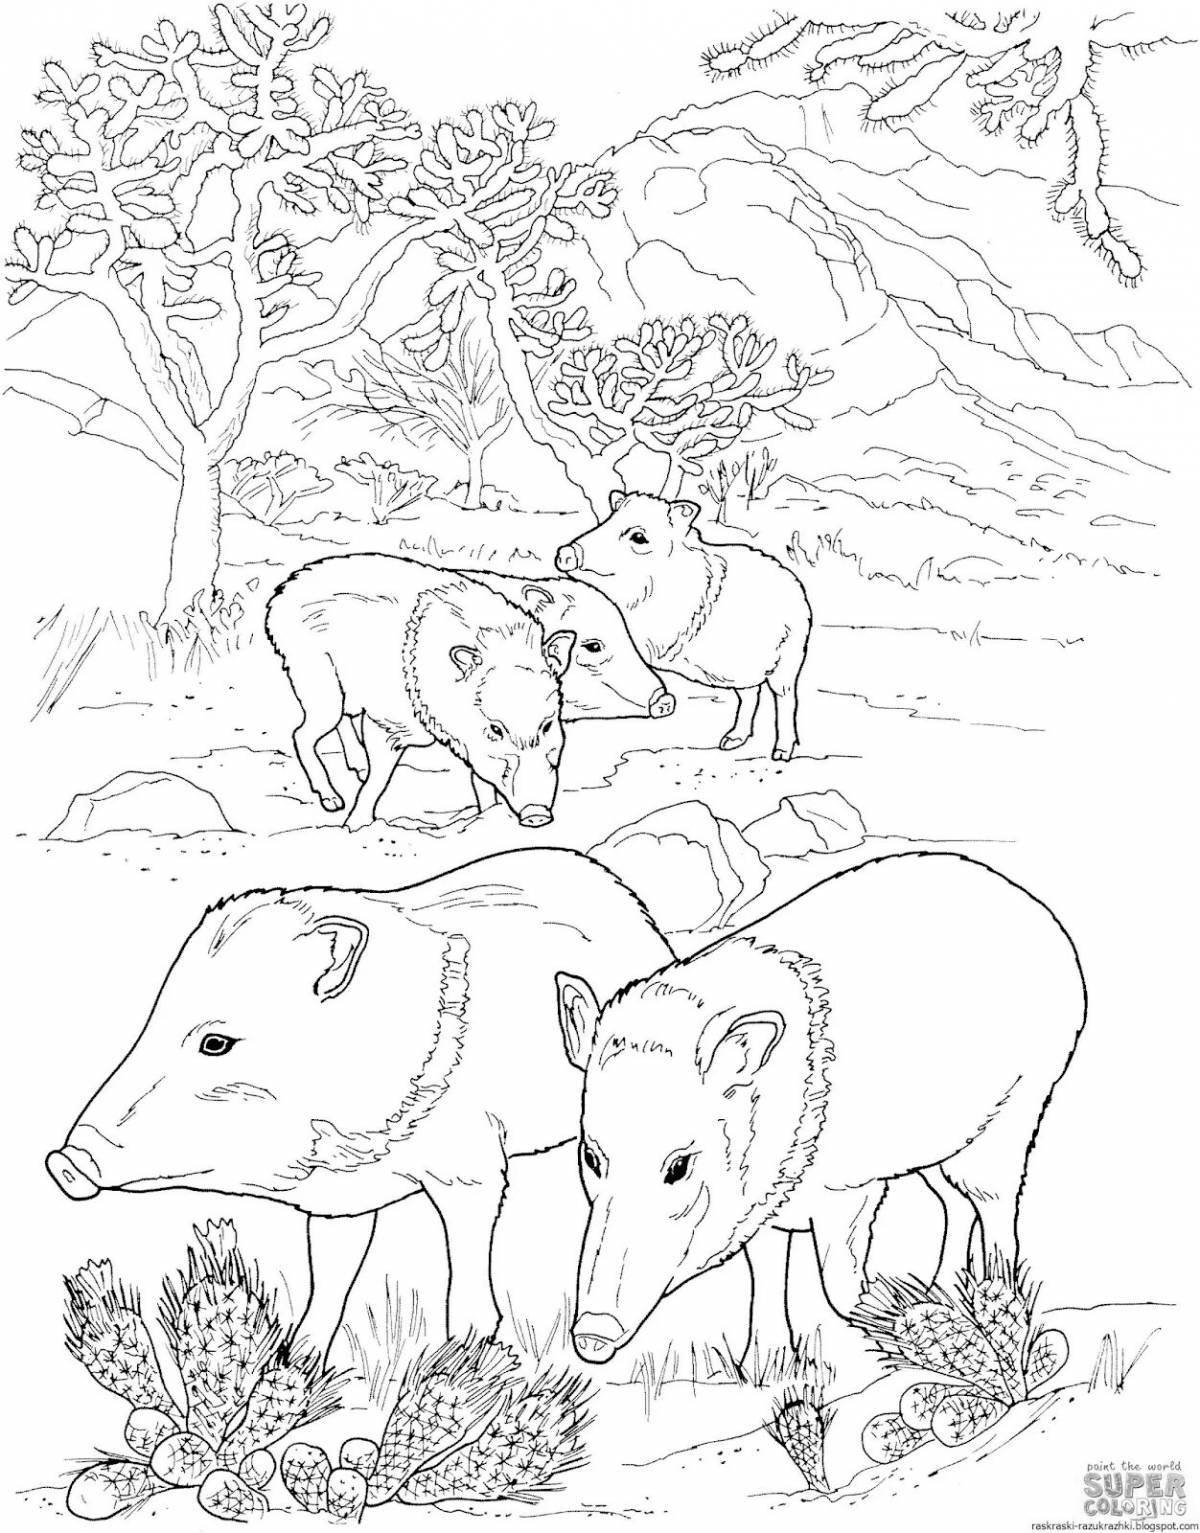 Wonderful wild animal and baby coloring book